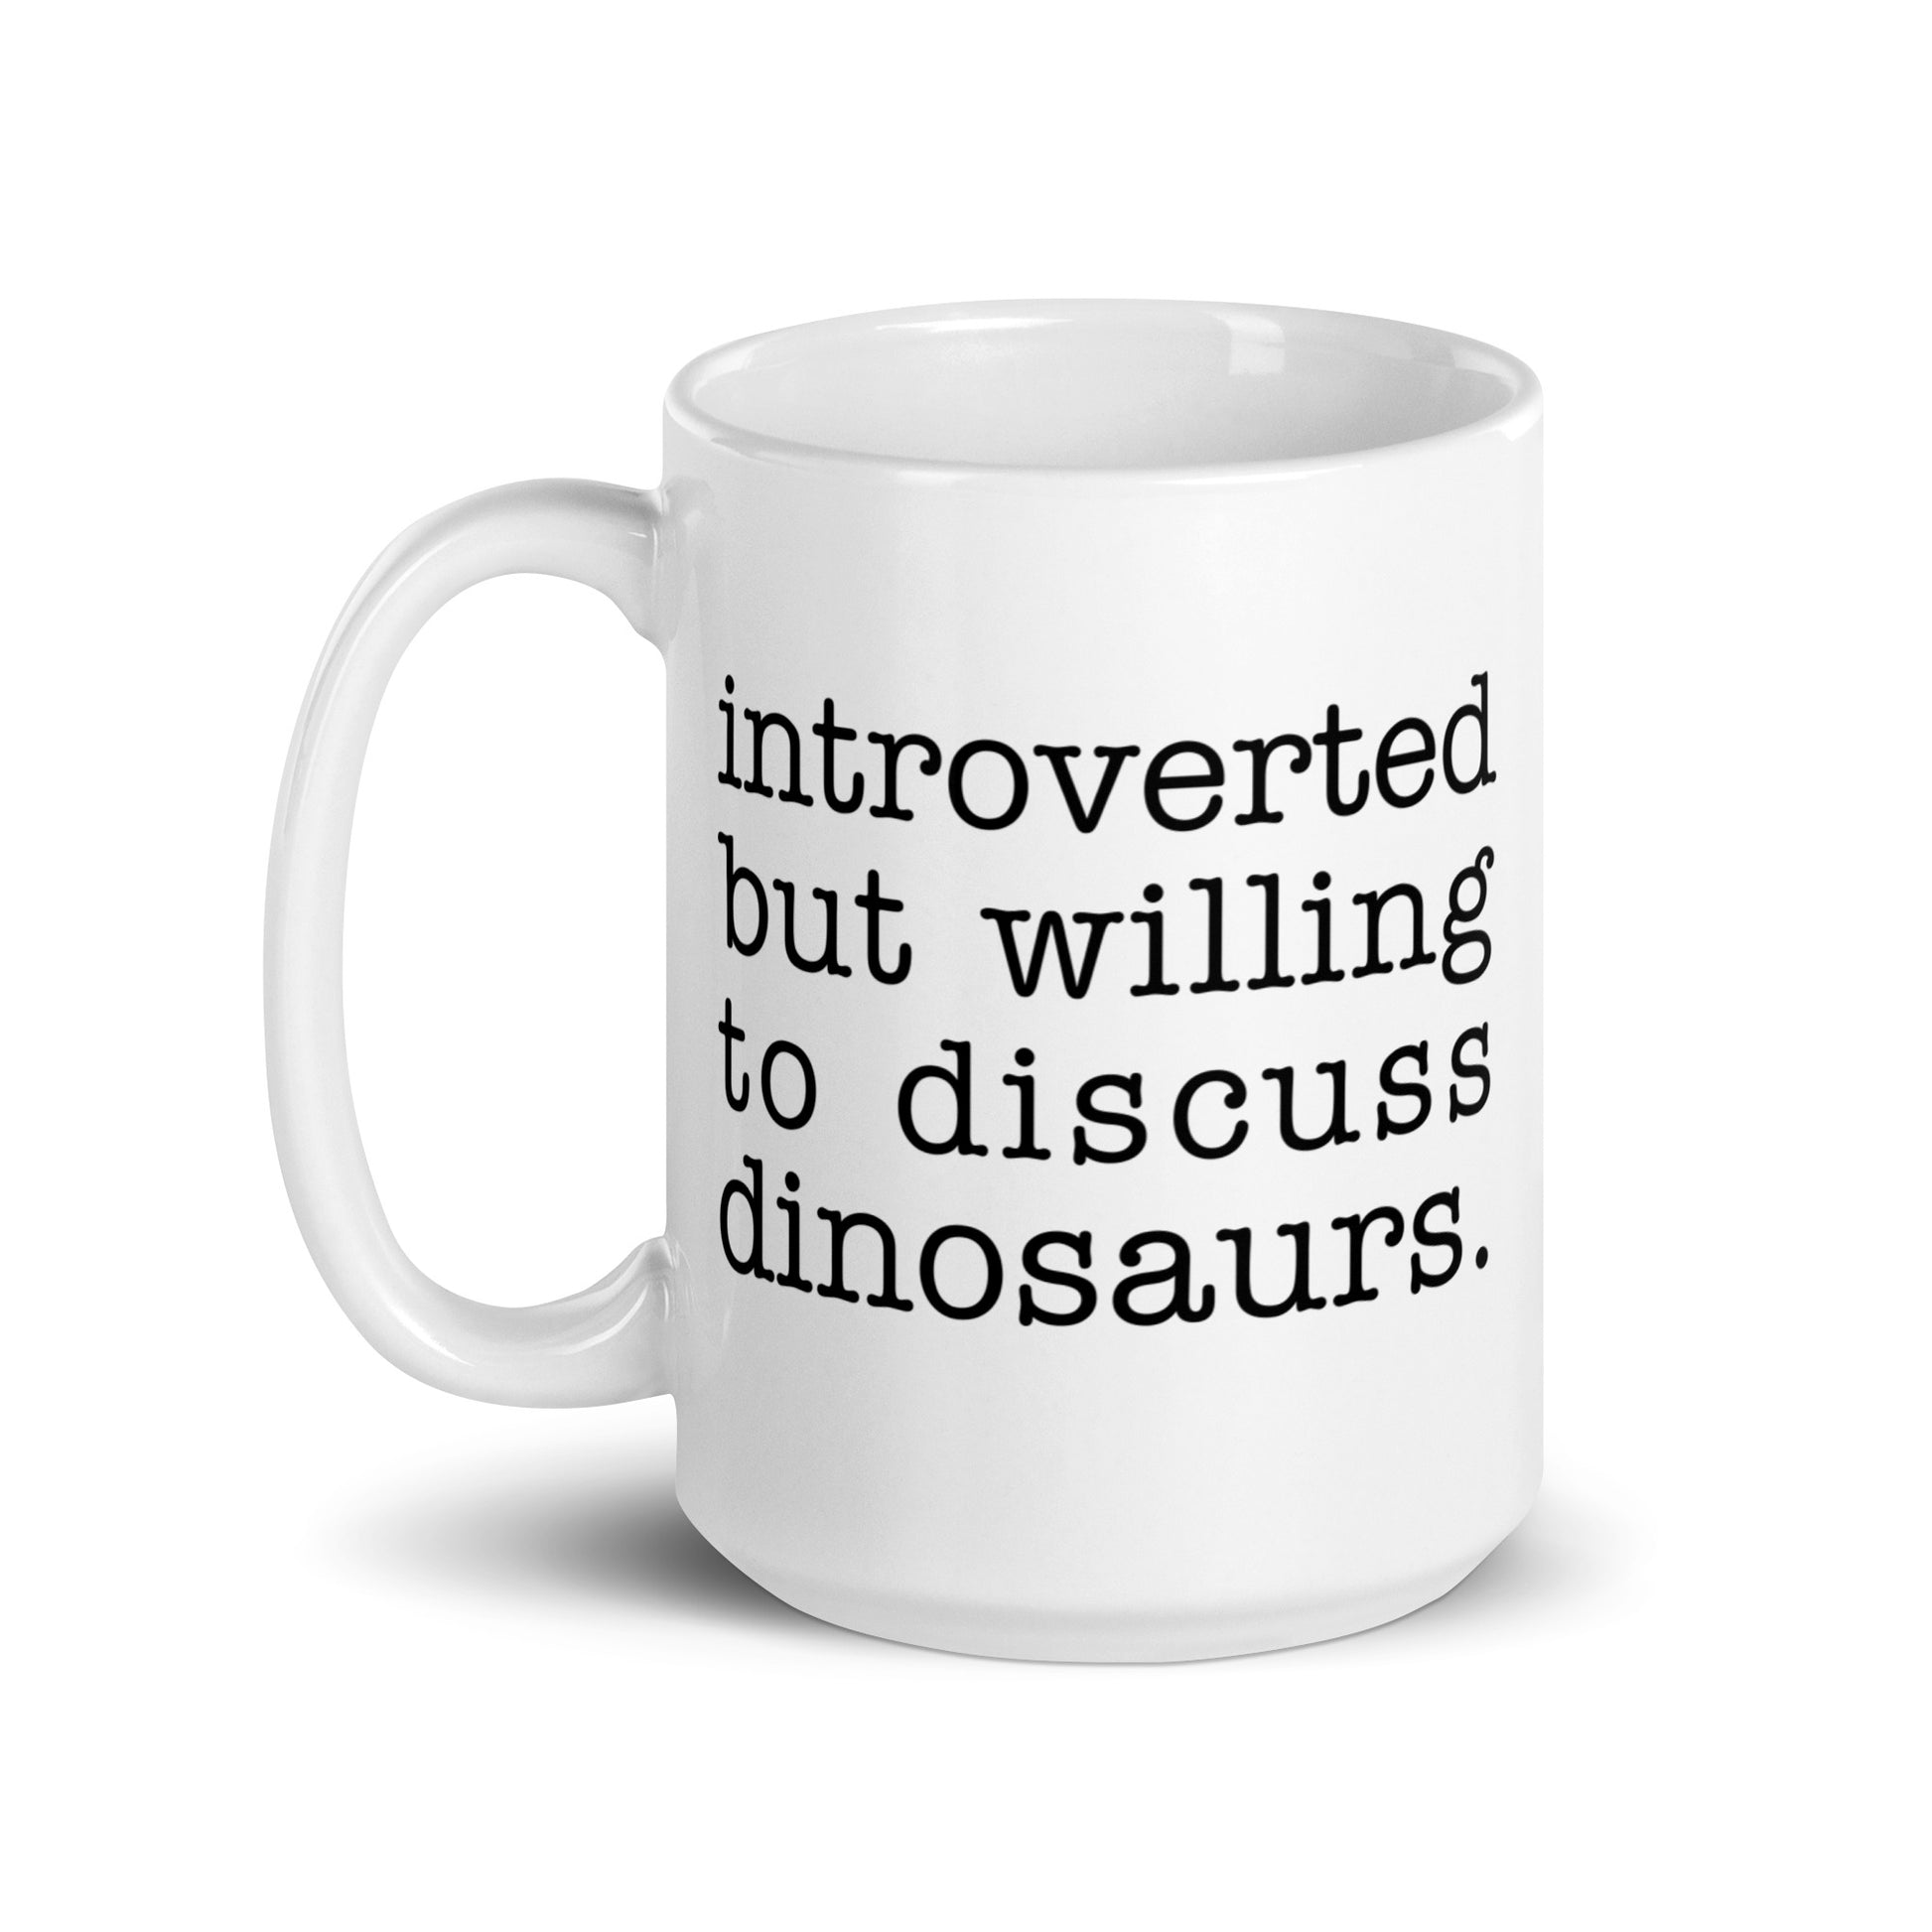 A white 15 ounce ceramic mug with text reading "introverted but willing to discuss dinosaurs"